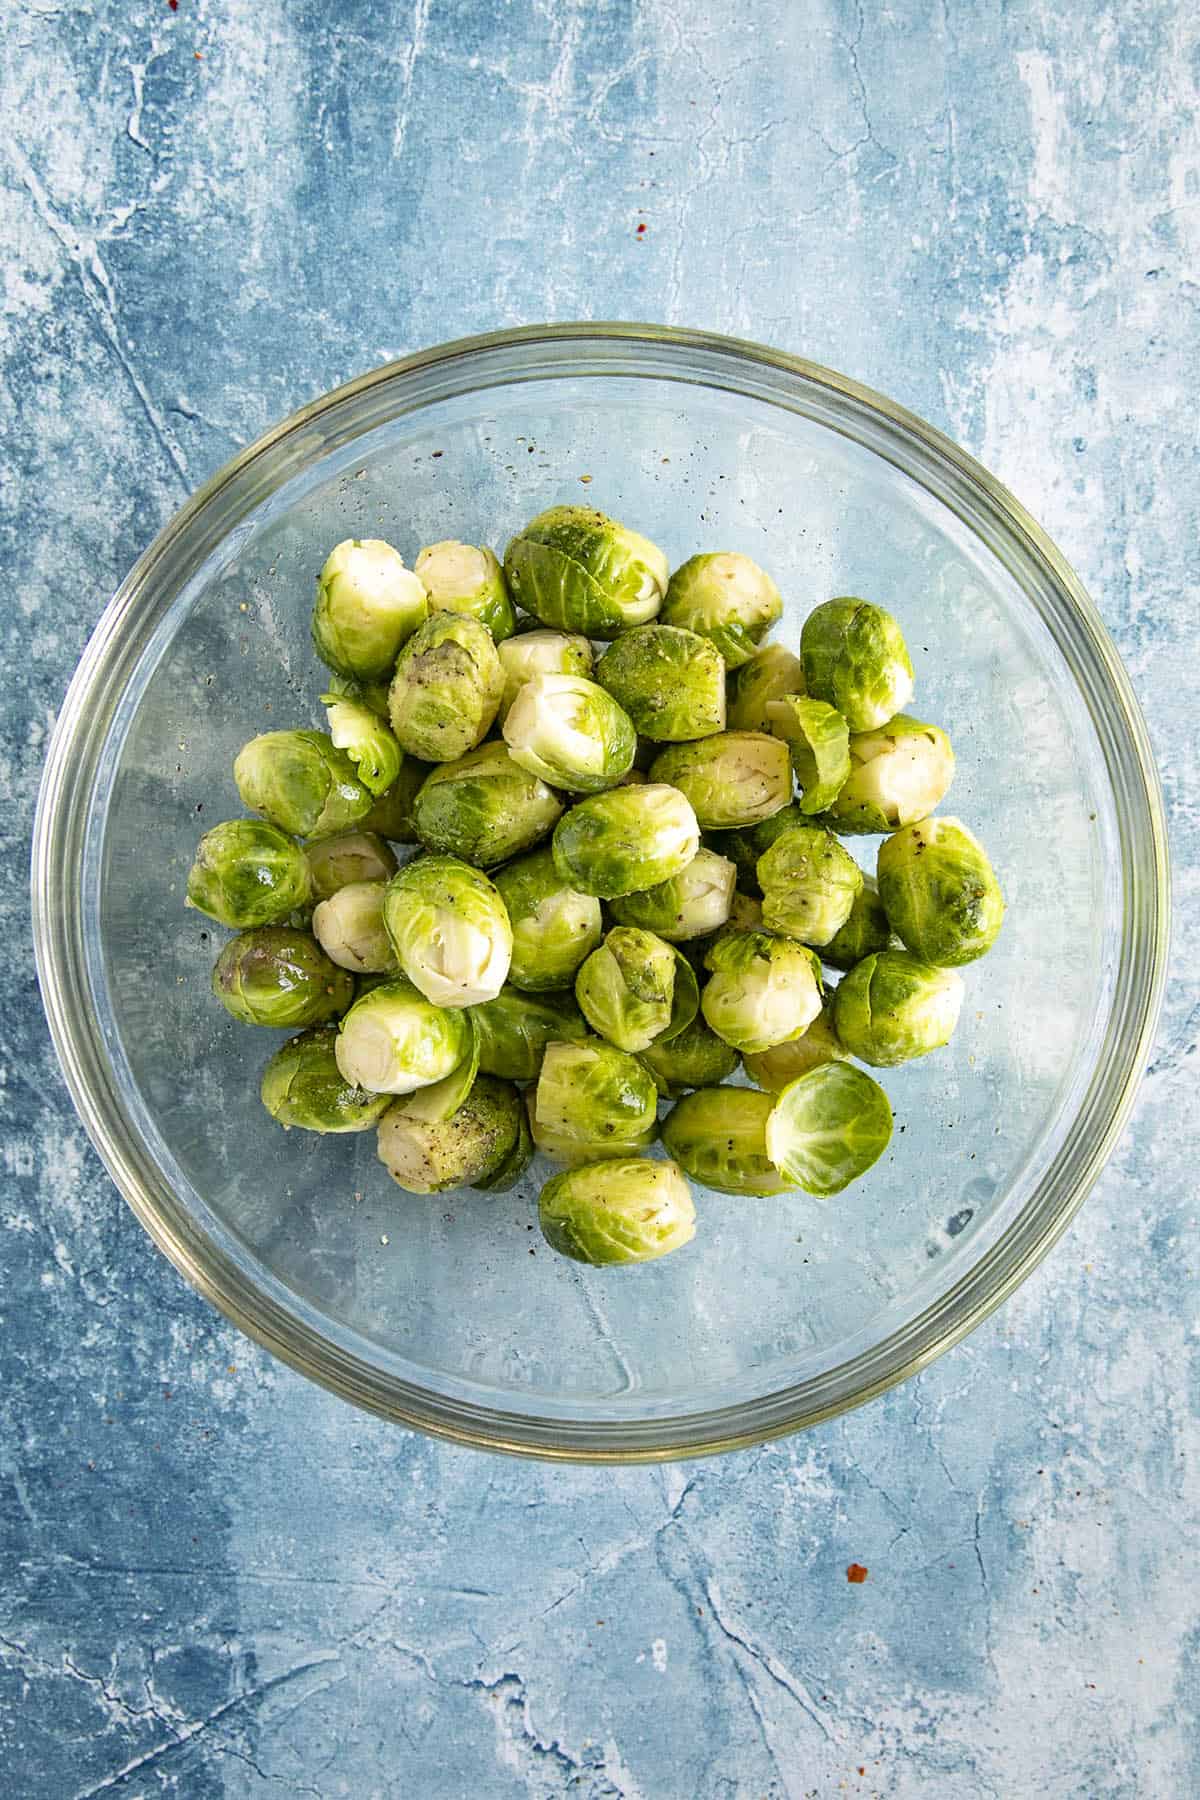 Brussels Sprouts in a bowl, ready for cooking